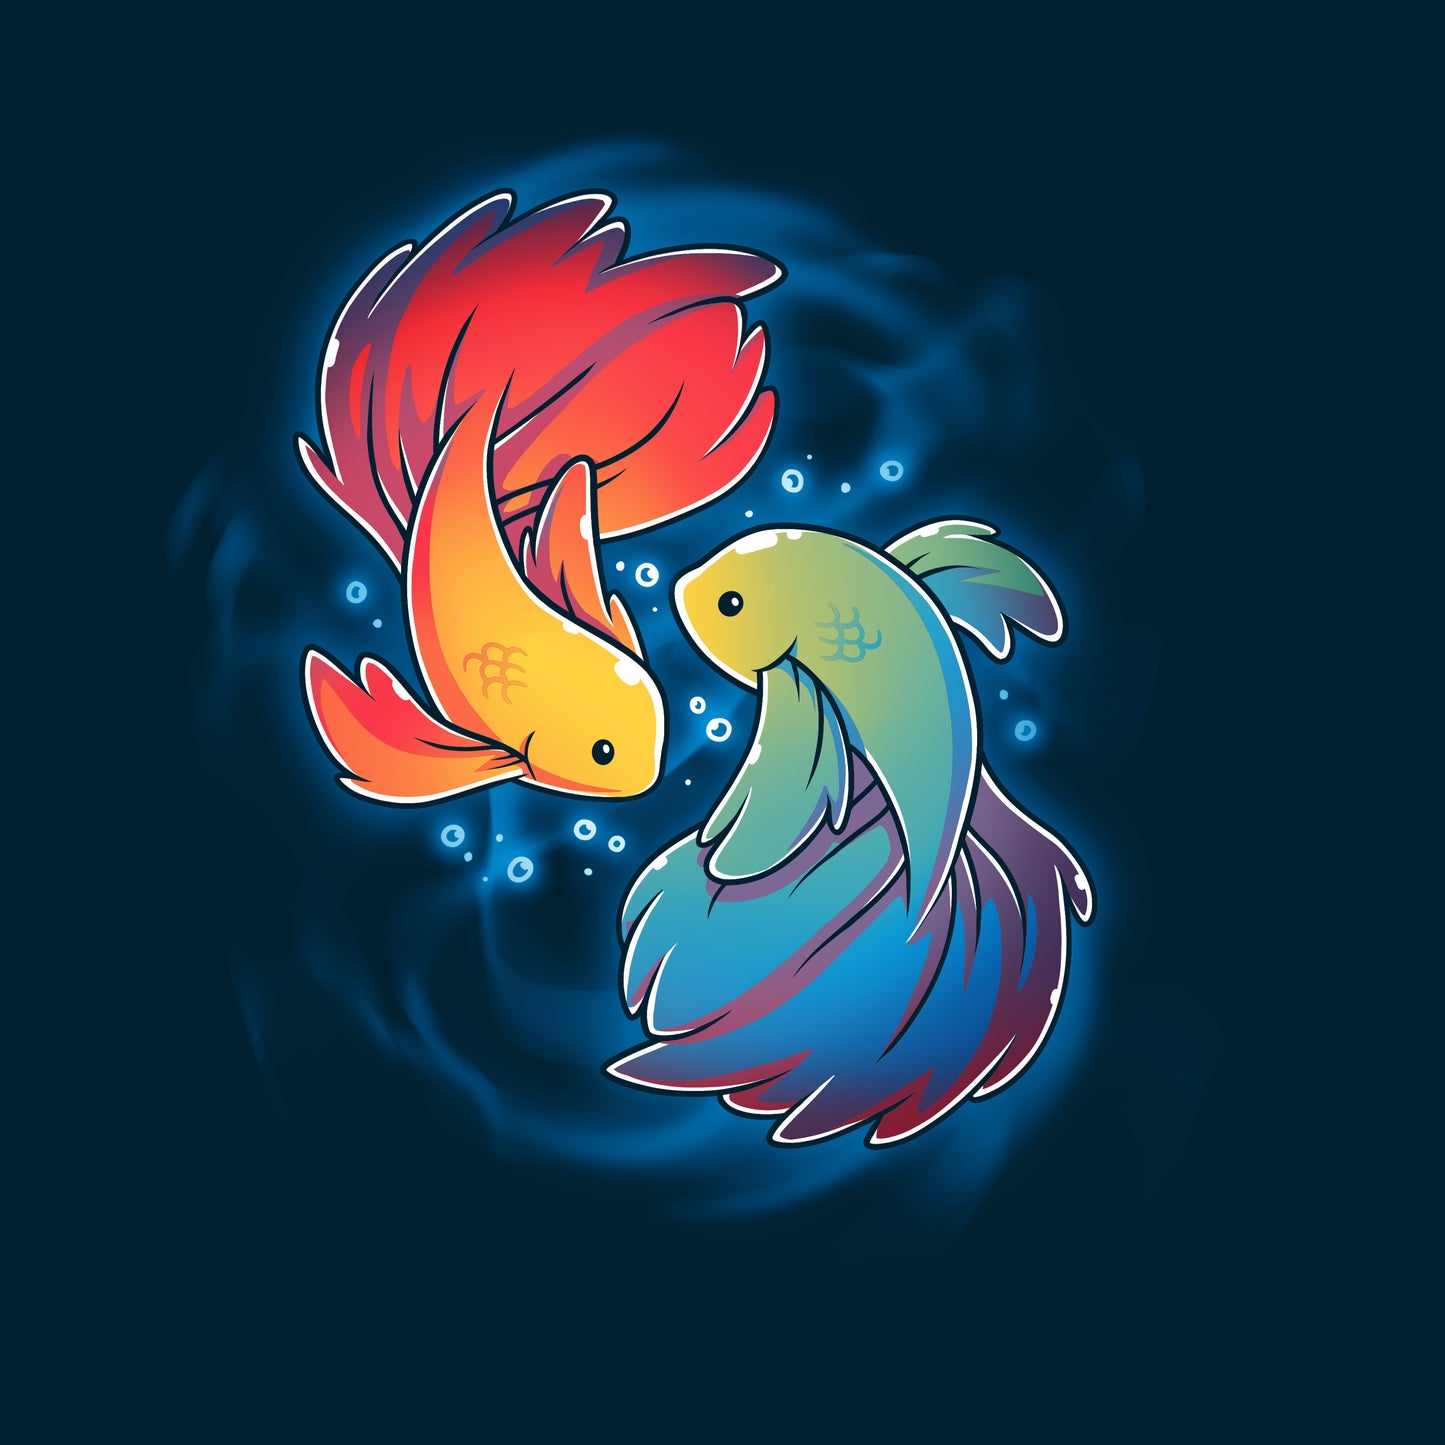 Illustration of two colorful Rainbow Betta fish swimming in a circular pattern on a navy blue t-shirt. One fish is red and yellow, the other is green and blue. Small bubbles surround them. This product is called "Rainbow Betta," created by monsterdigital.